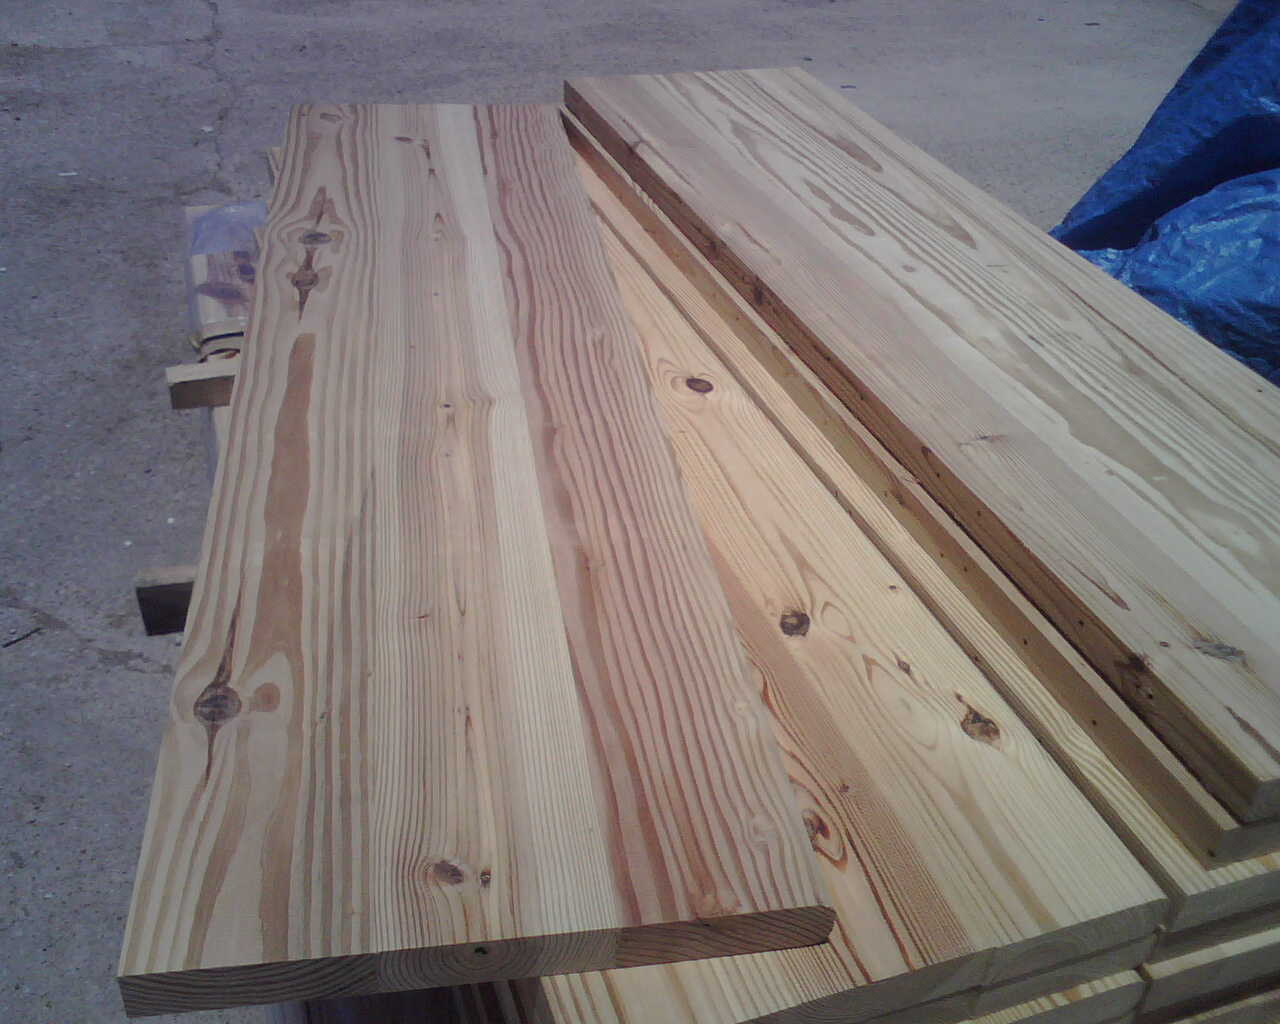 Pine boards